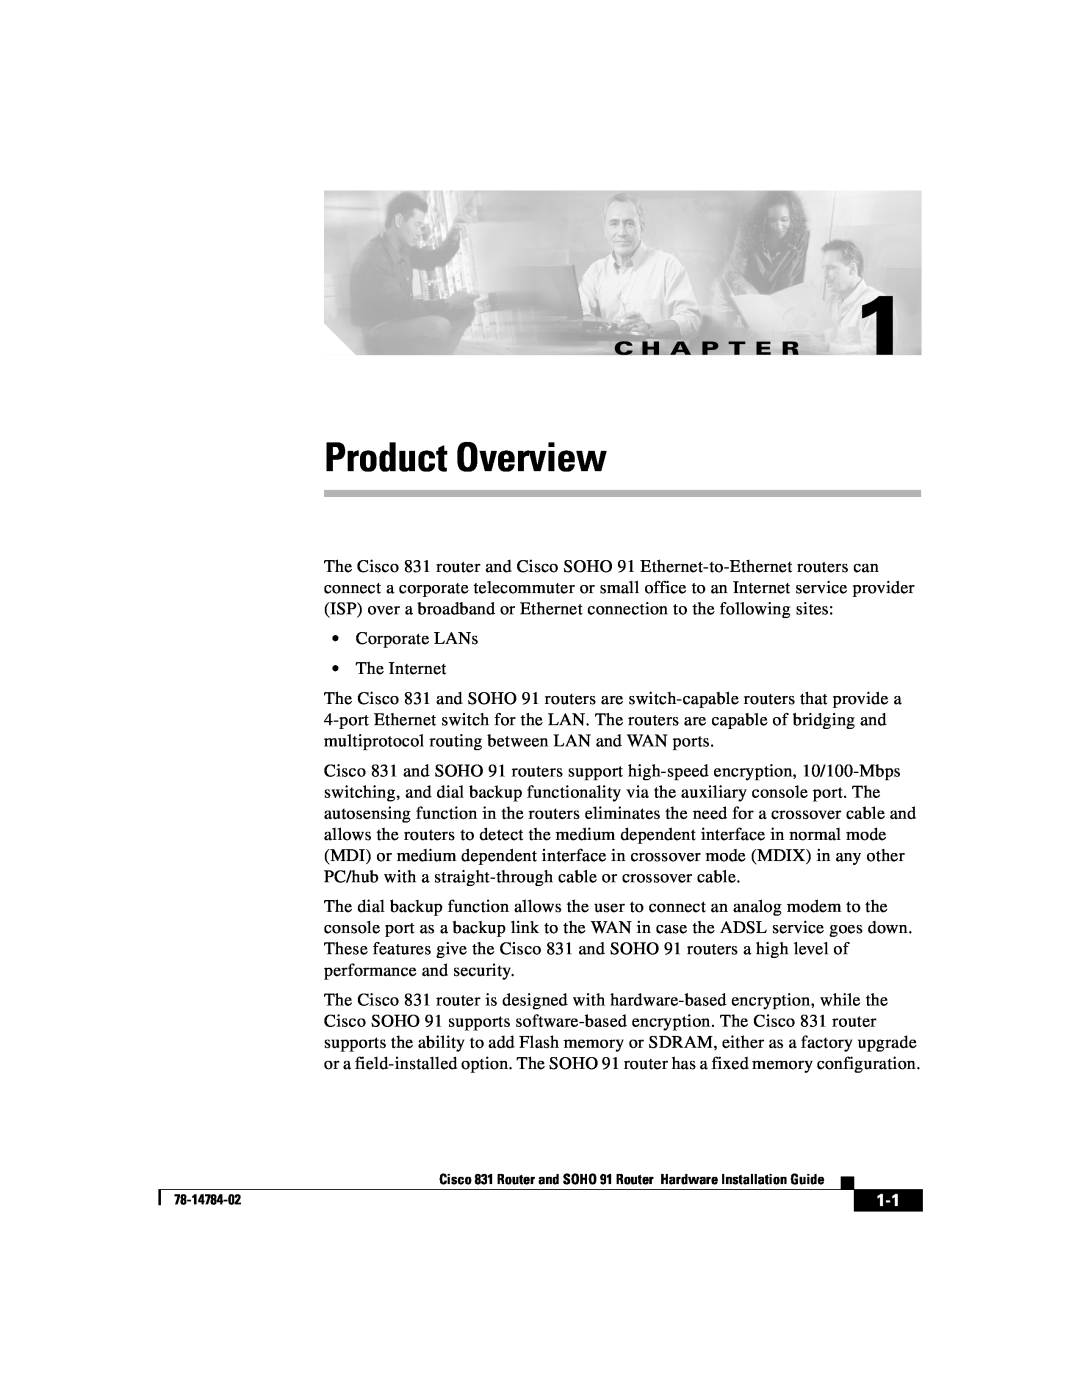 Cisco Systems 78-14784-02 manual Product Overview, C H A P T E R 